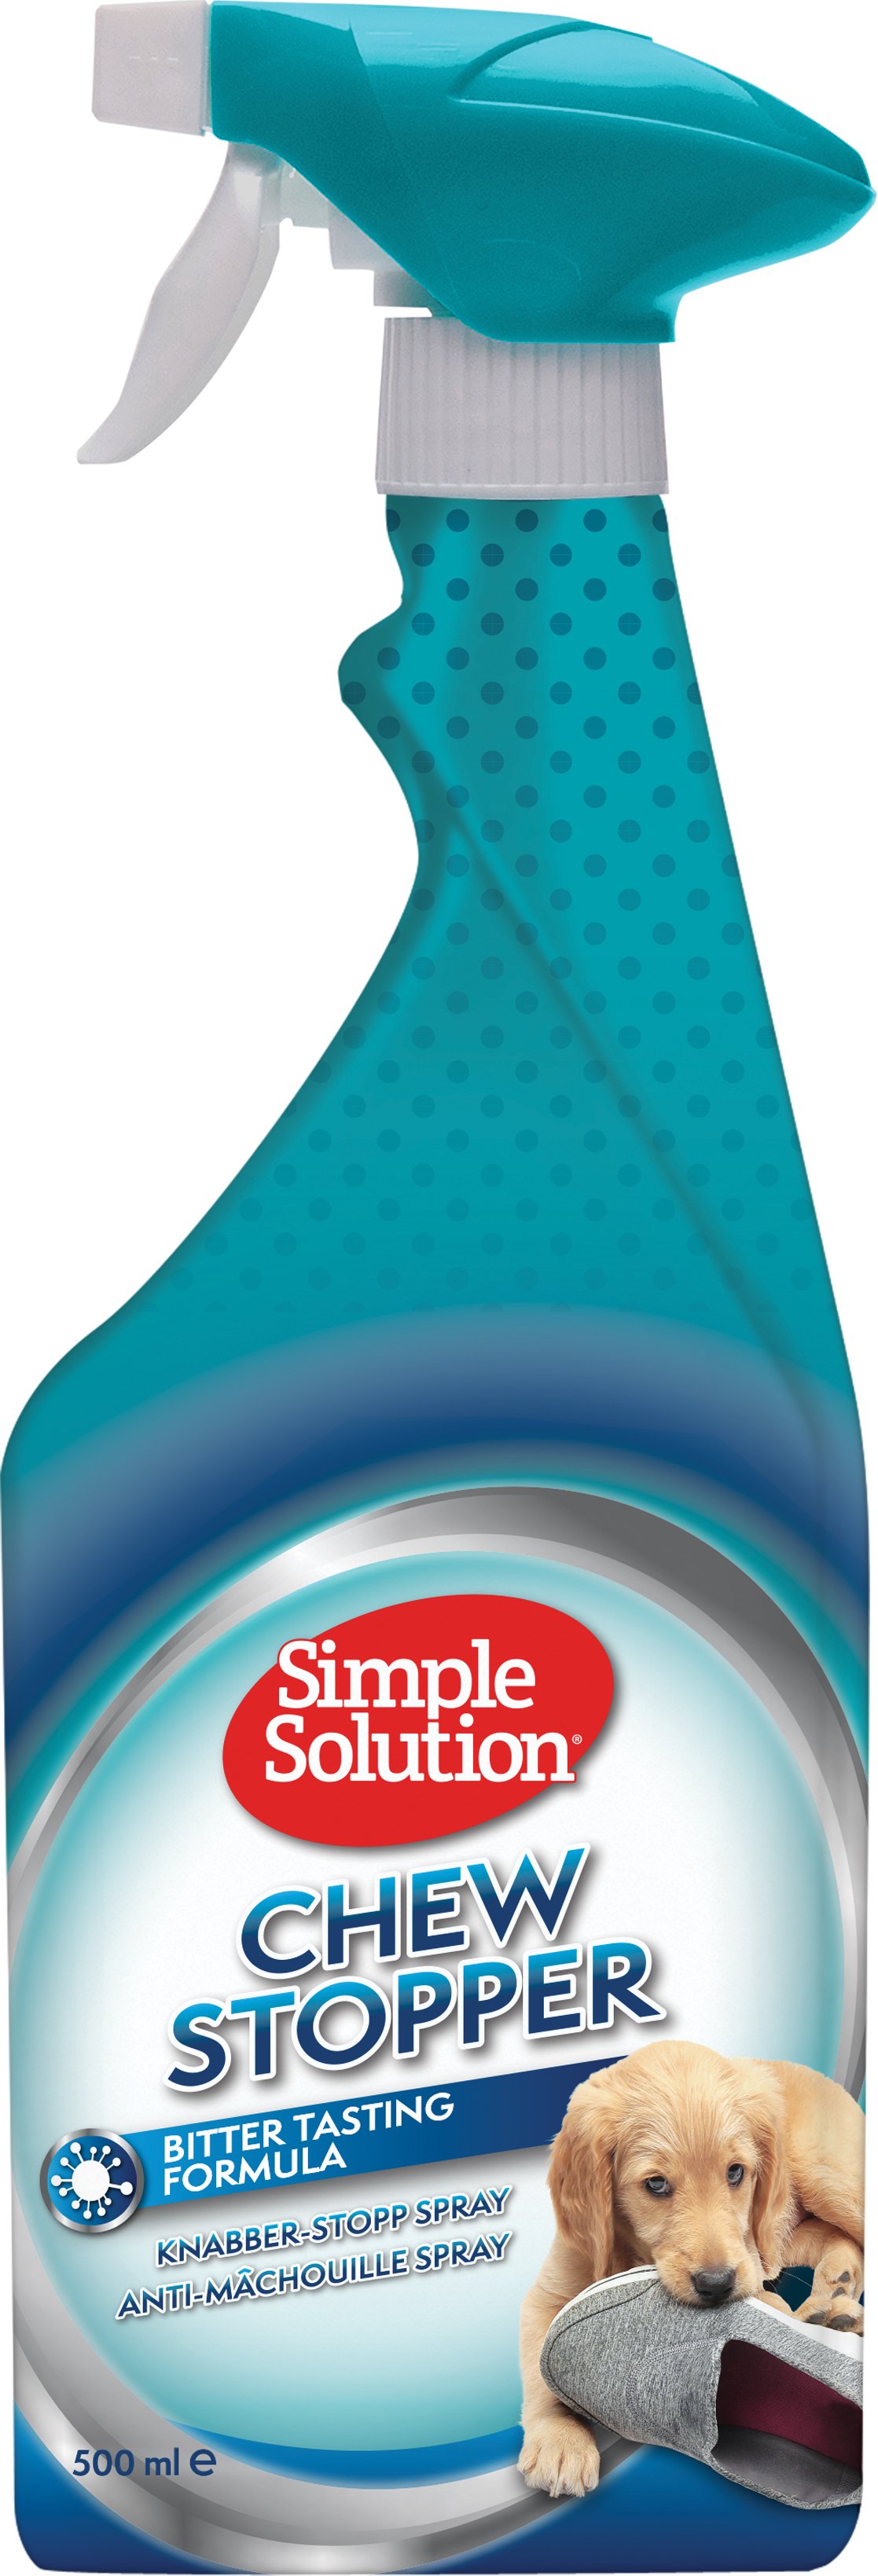 Simple Solution Chew Stopper Spray 500 ml